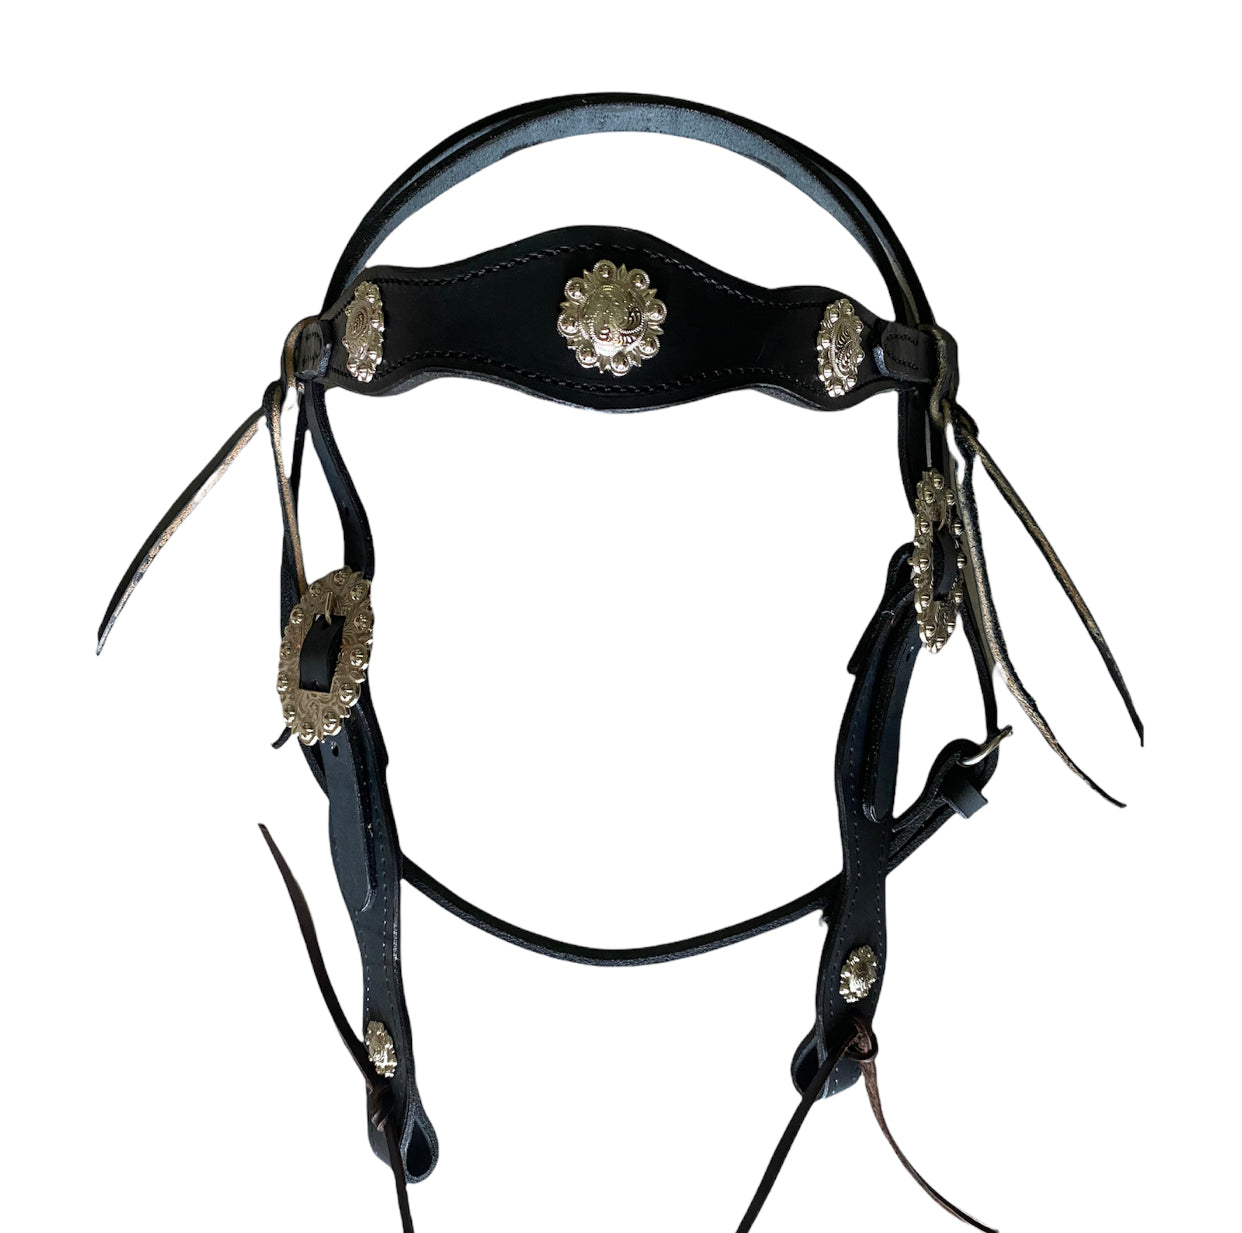 T5417  - Aust Pre-Oiled Black Brow Band Bridle - Lace Ends